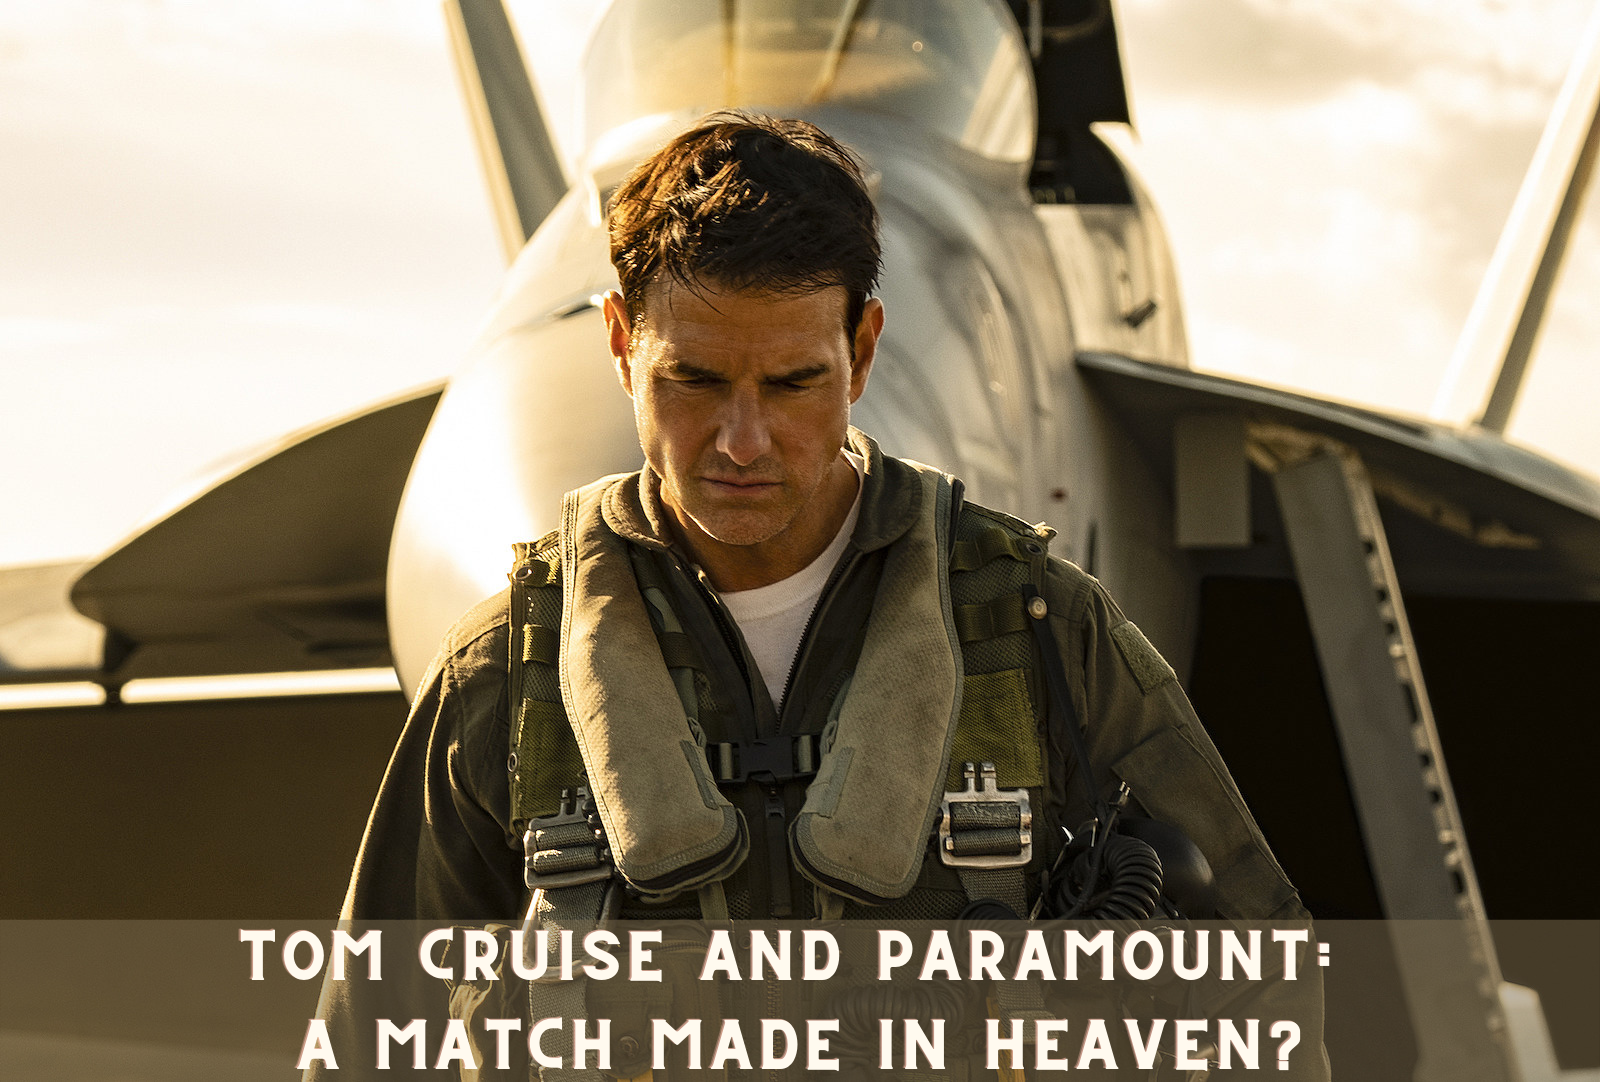 Tom Cruise and Paramount: A Match made in Heaven?